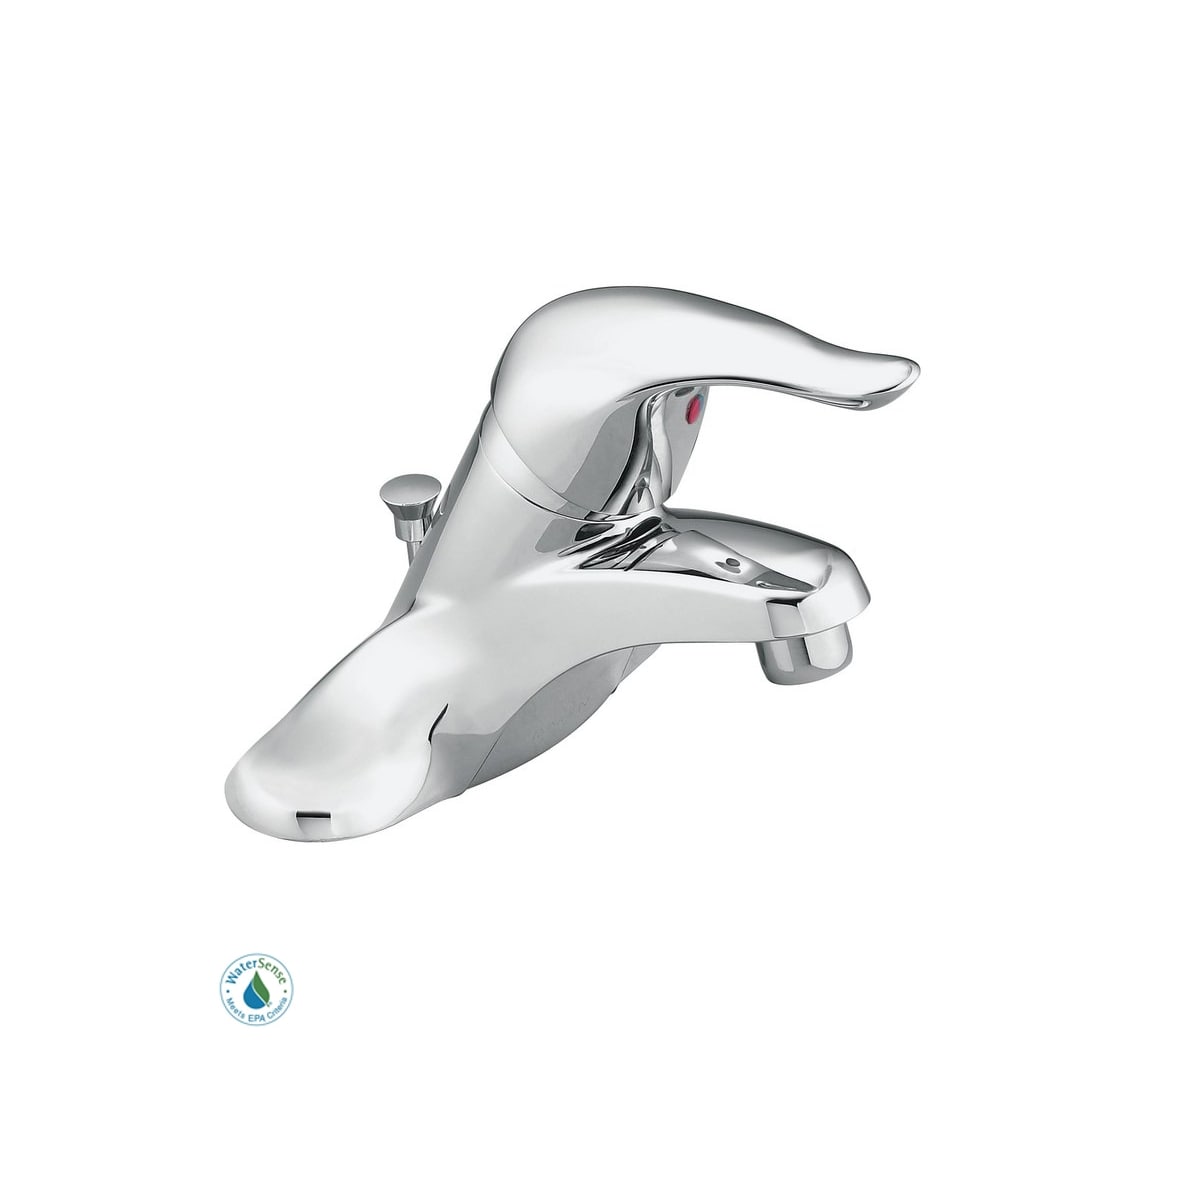 Moen 64621 Single Handle Centerset Bathroom Faucet with from the Chateau 